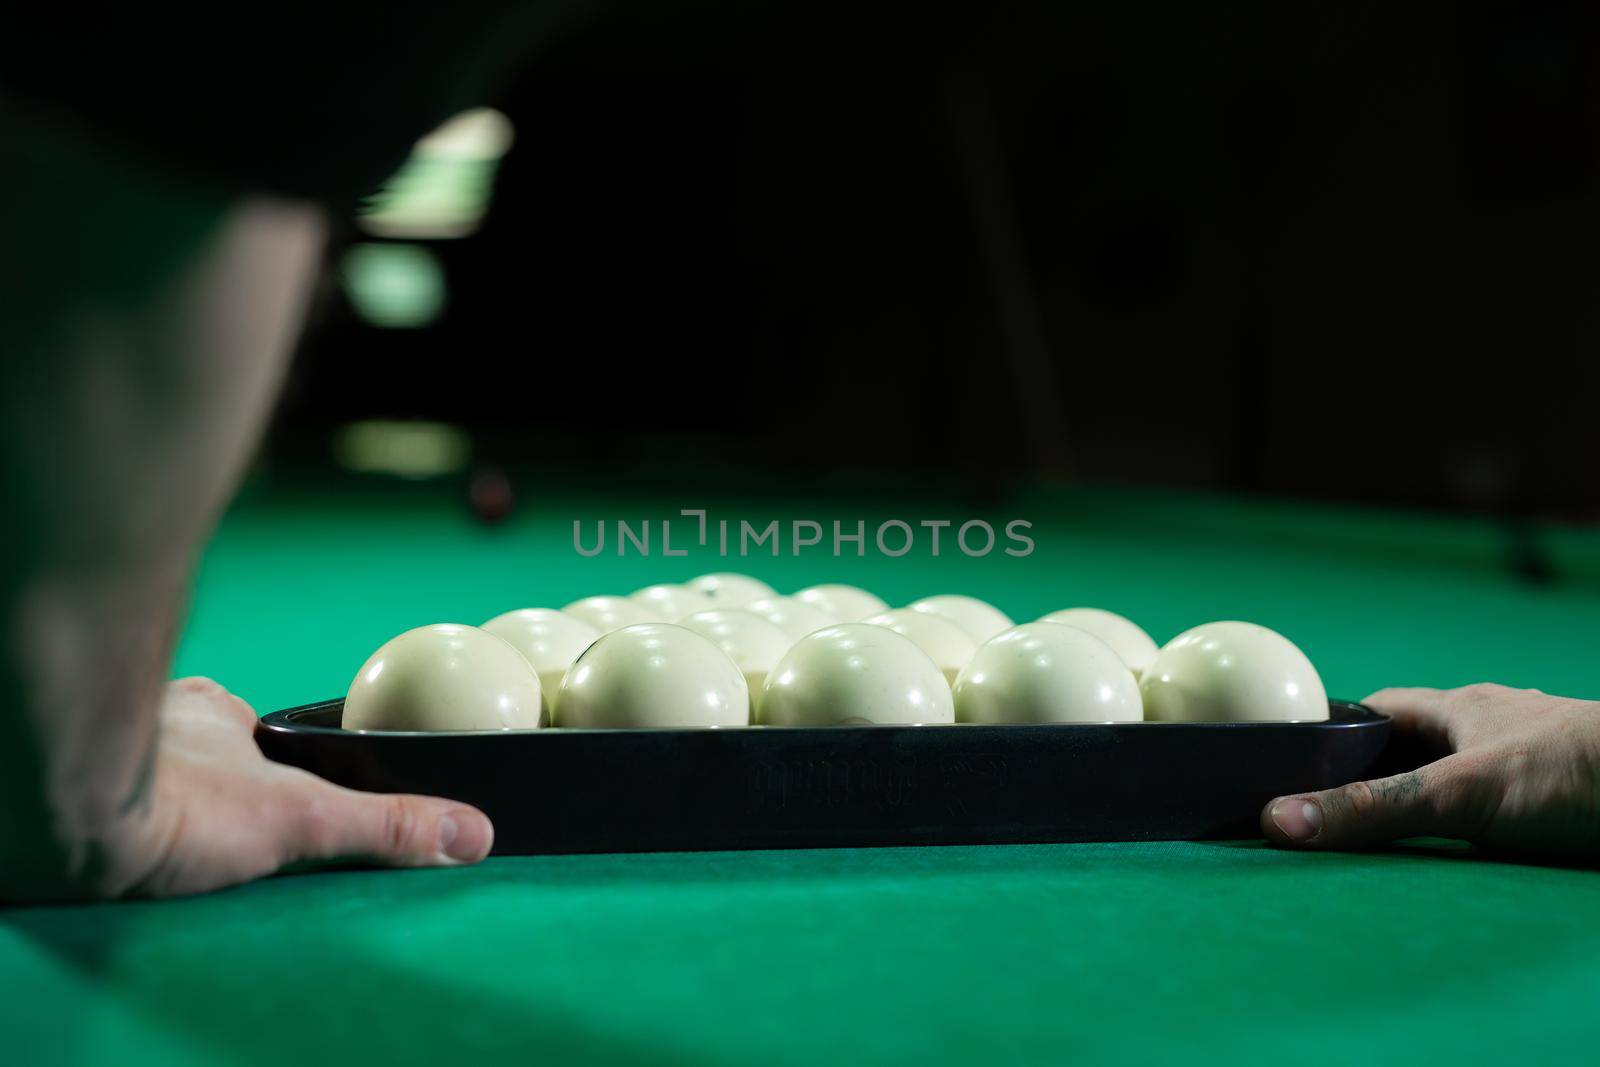 Triangle of billiard balls. A man getting ready to start a game of billiards. by StudioPeace